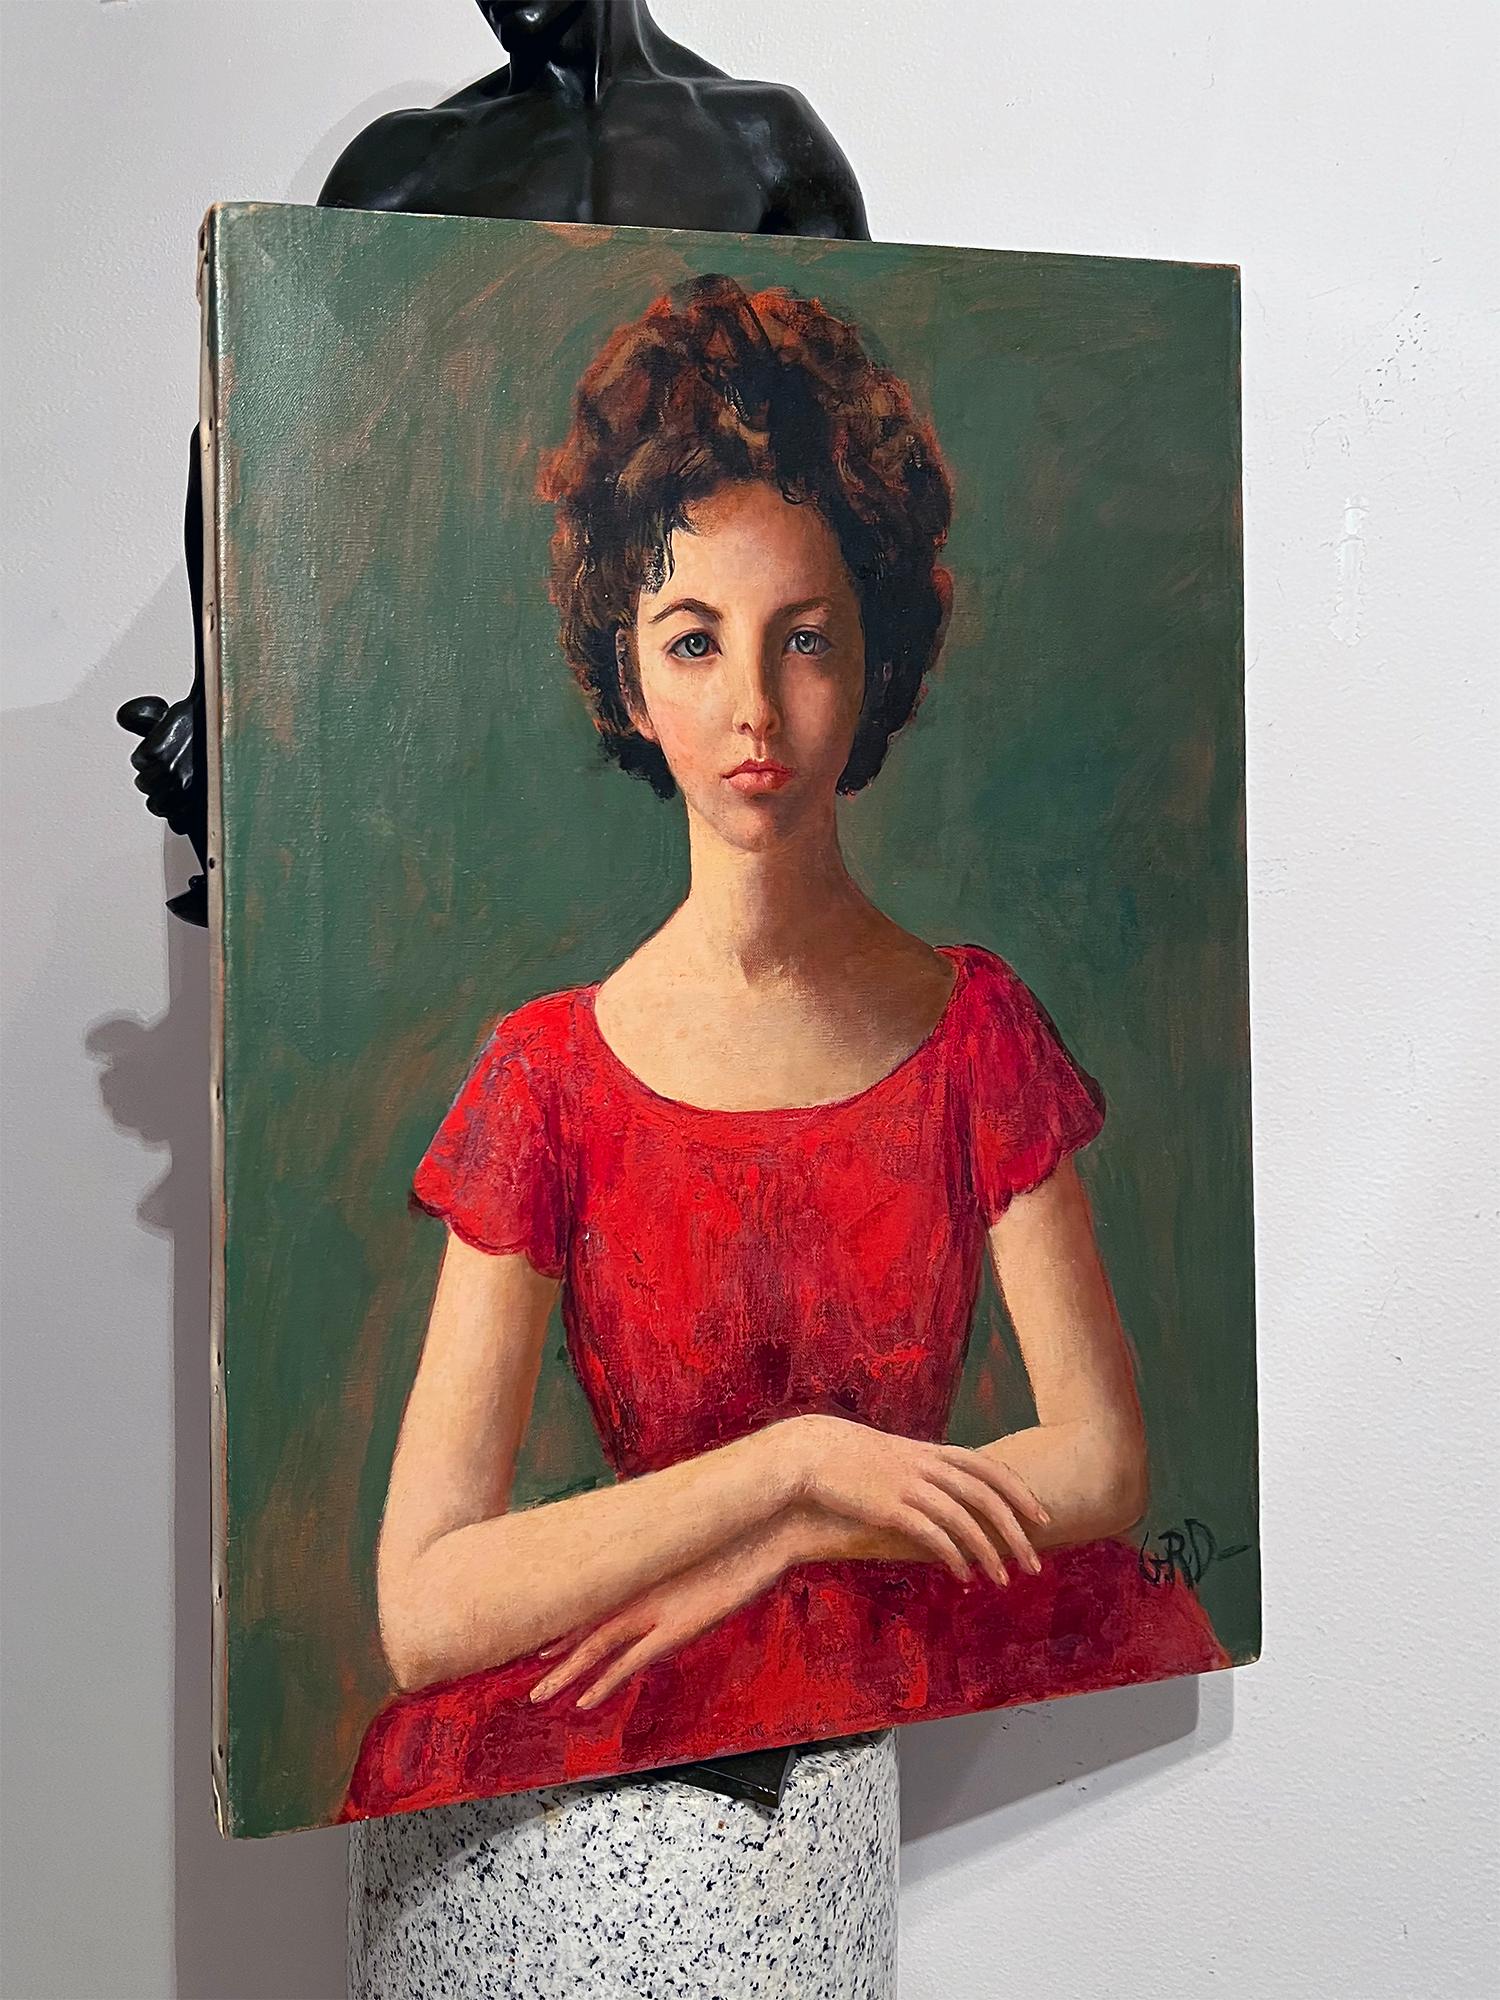 Mid-century female illustrator/artist  Gladys Rockmore Davis paints a compelling portrait of a contemplative beauty who looks like Elizabeth Taylor.  Frontal and lateral forces work together in this pyramidal composition. The sitter stares down at